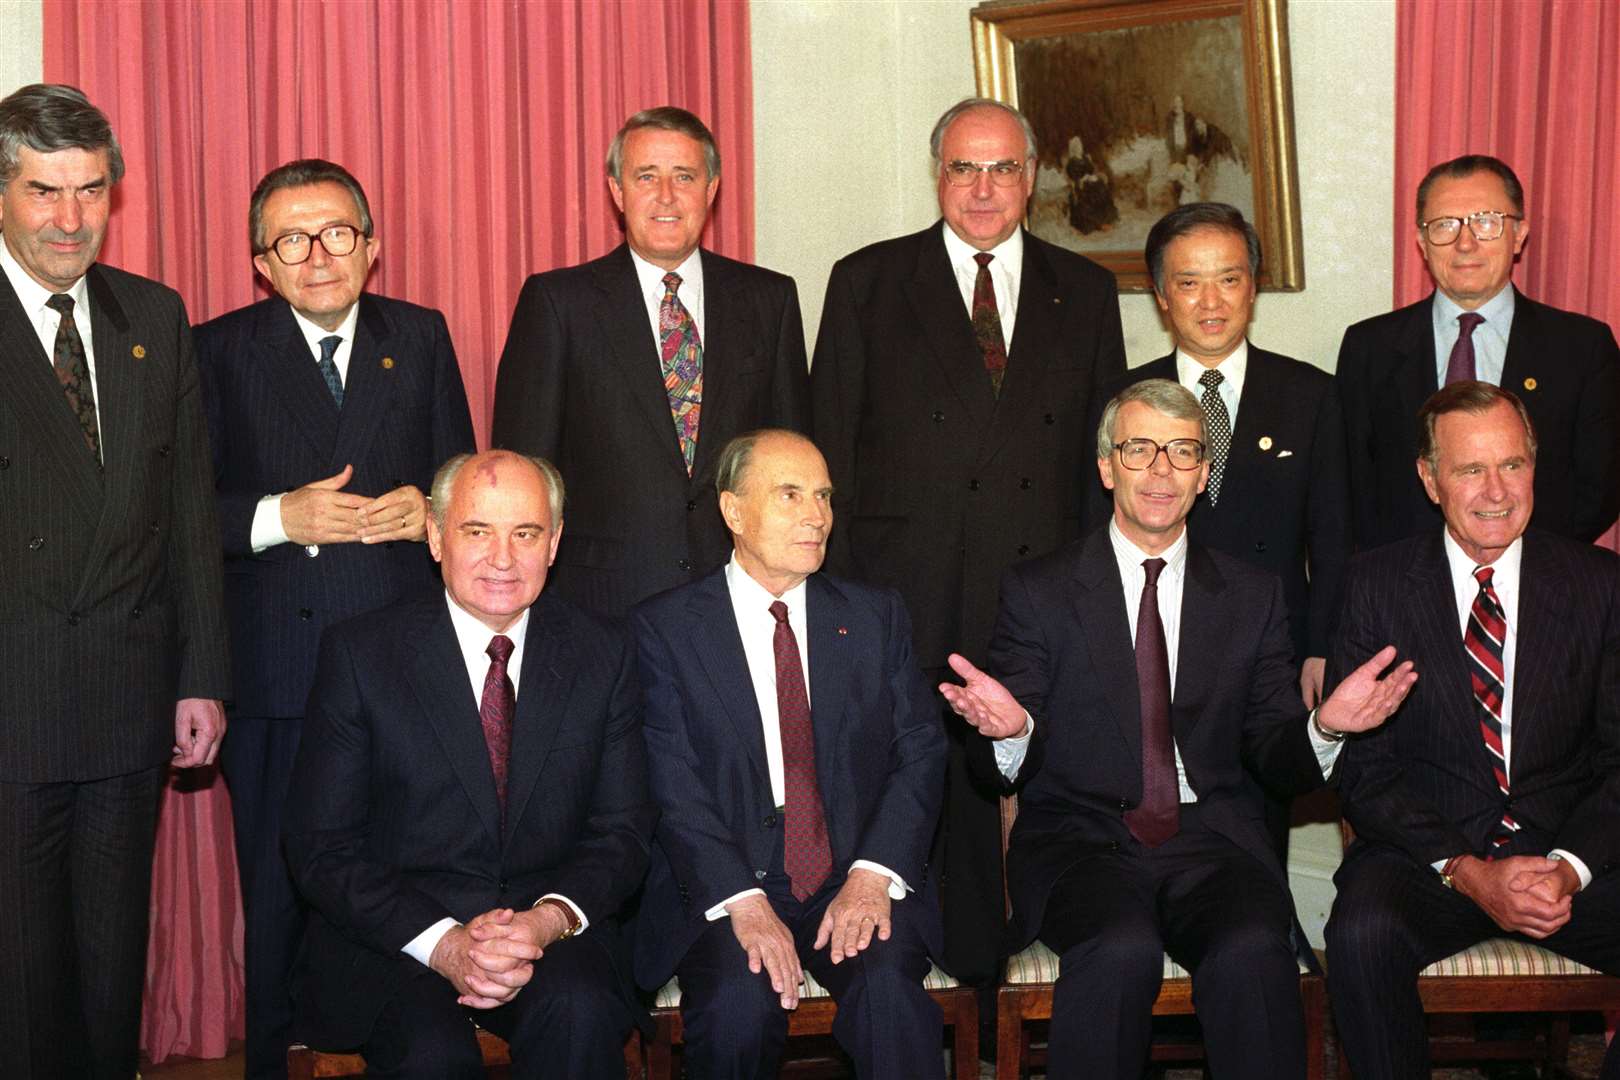 The G7 leaders pose for a photograph inside 10 Downing Street. Back row (l-r): Ruud Lubbers, Giulio Andreotti, Brian Mulroney, Helmut Kohl, Toshiki Kaifu and Jacques Delors. Front: Mikhail Gorbachev, Francois Mitterrand, John Major and George Bush (Rebecca Naden/PA)